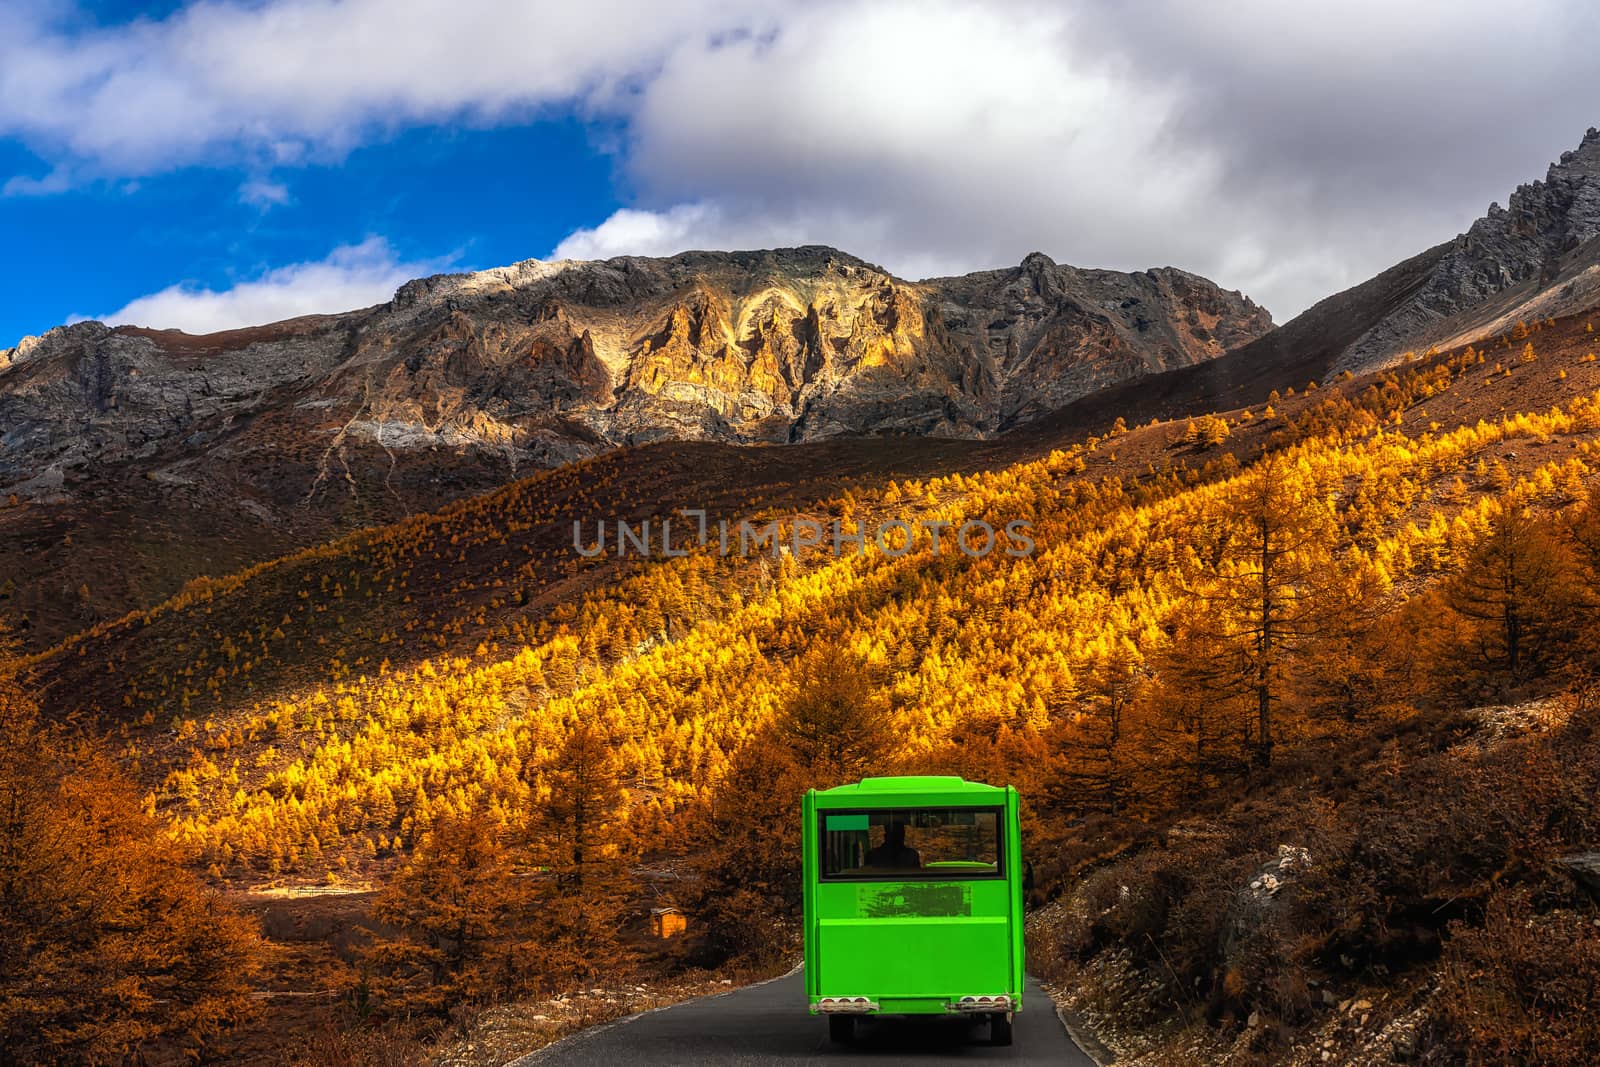 Electric car running over the mountain in autumn season in yadin by Tzido